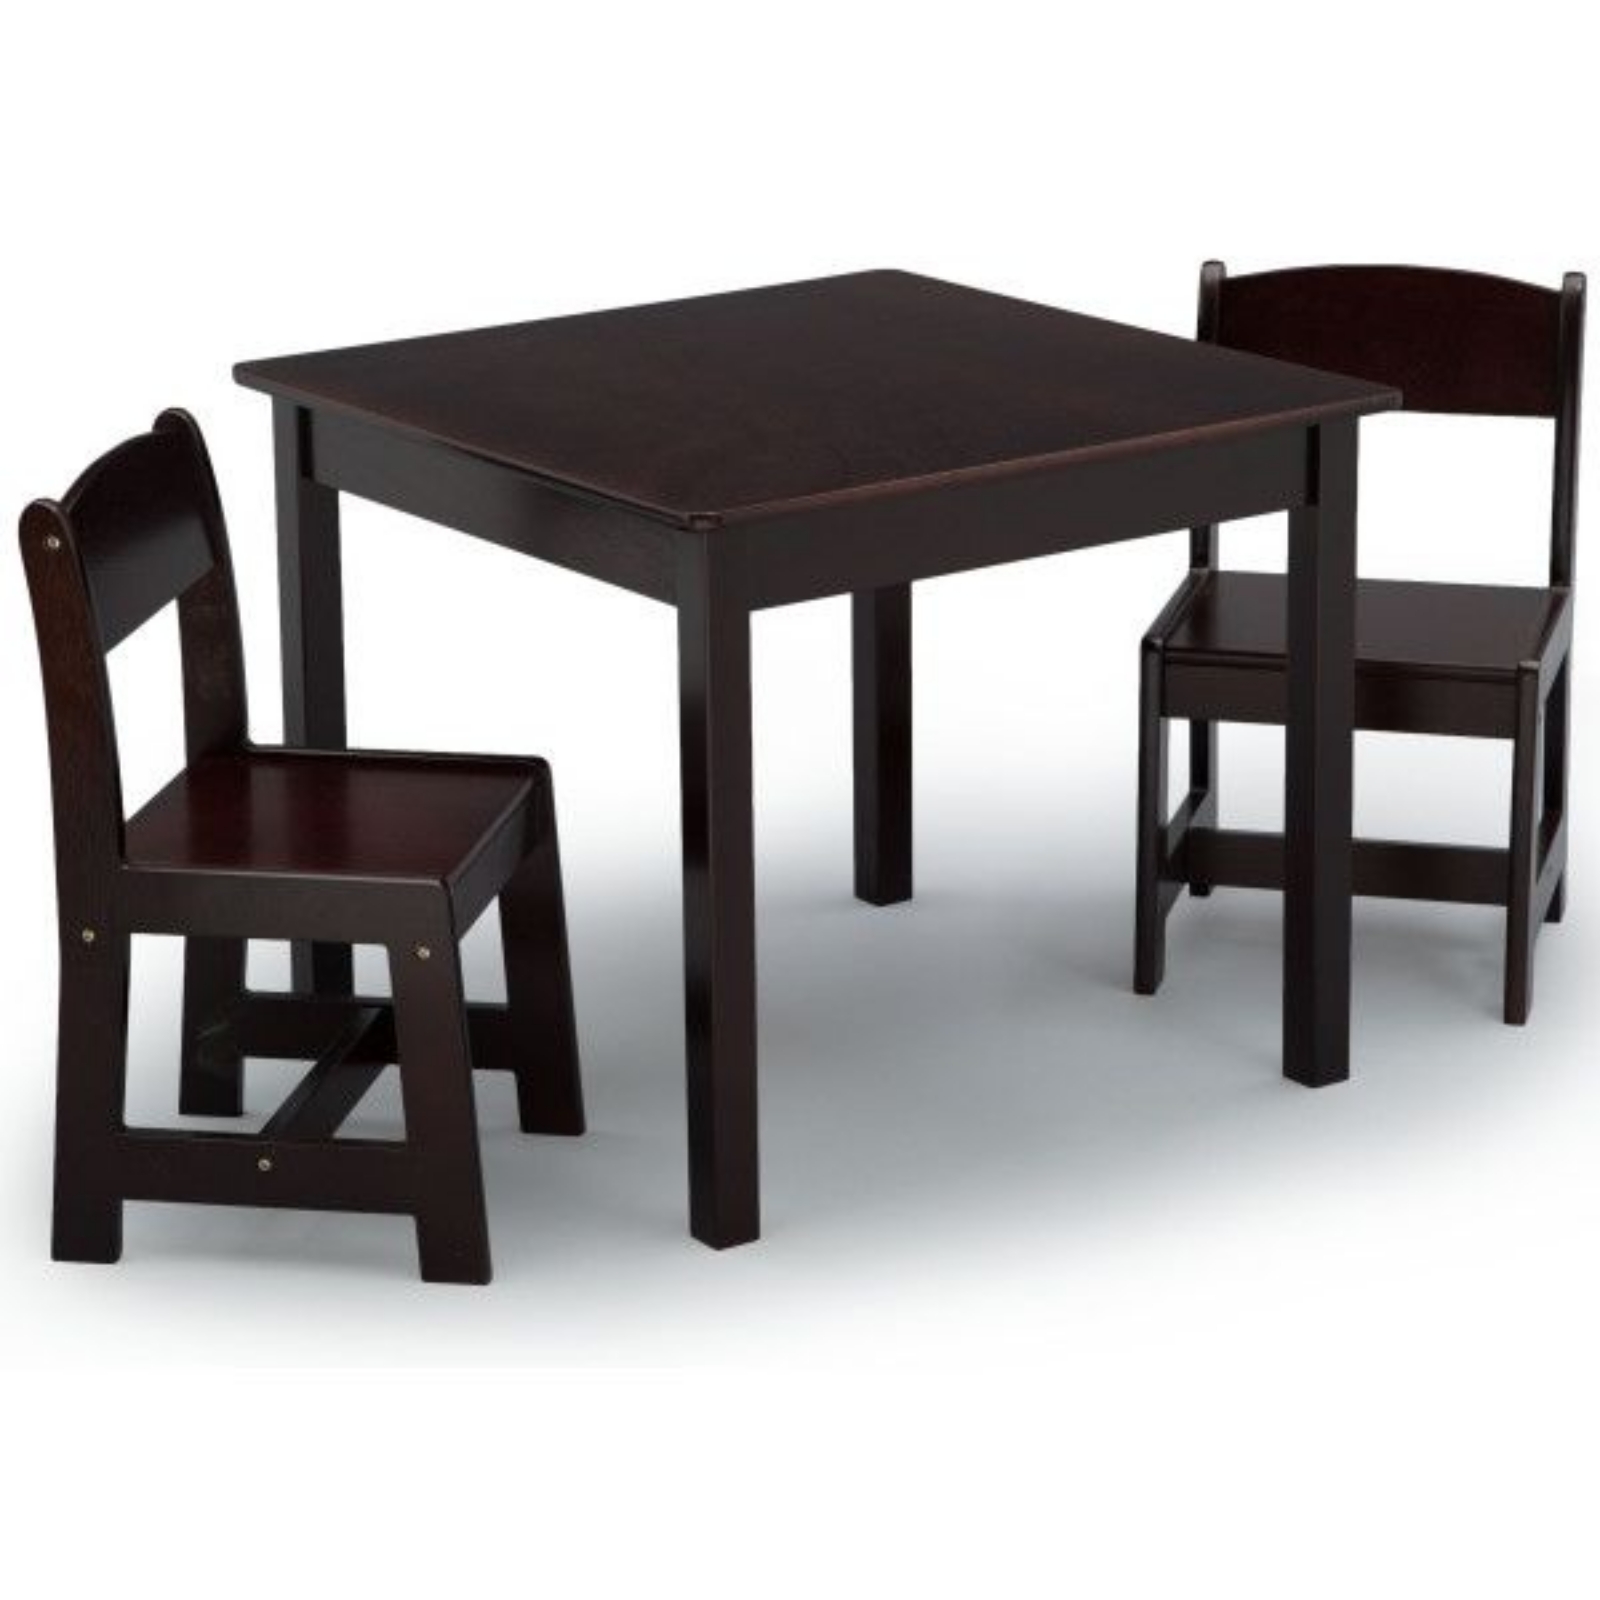 Picture of MySize Table & 2 Chairs